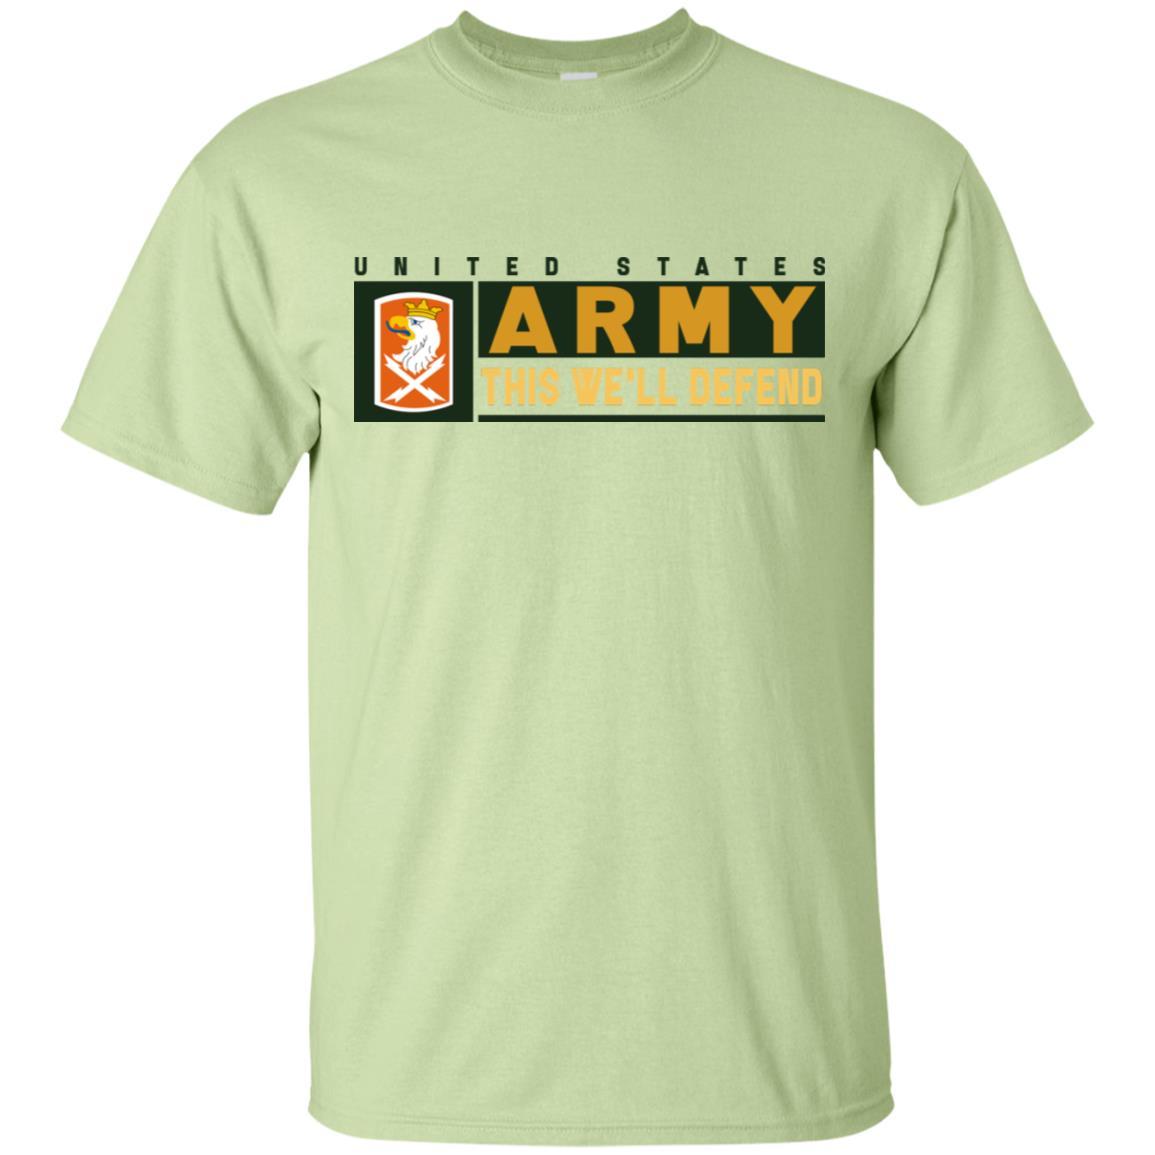 US Army 22ND SIGNAL BRIGADE- This We'll Defend T-Shirt On Front For Men-TShirt-Army-Veterans Nation